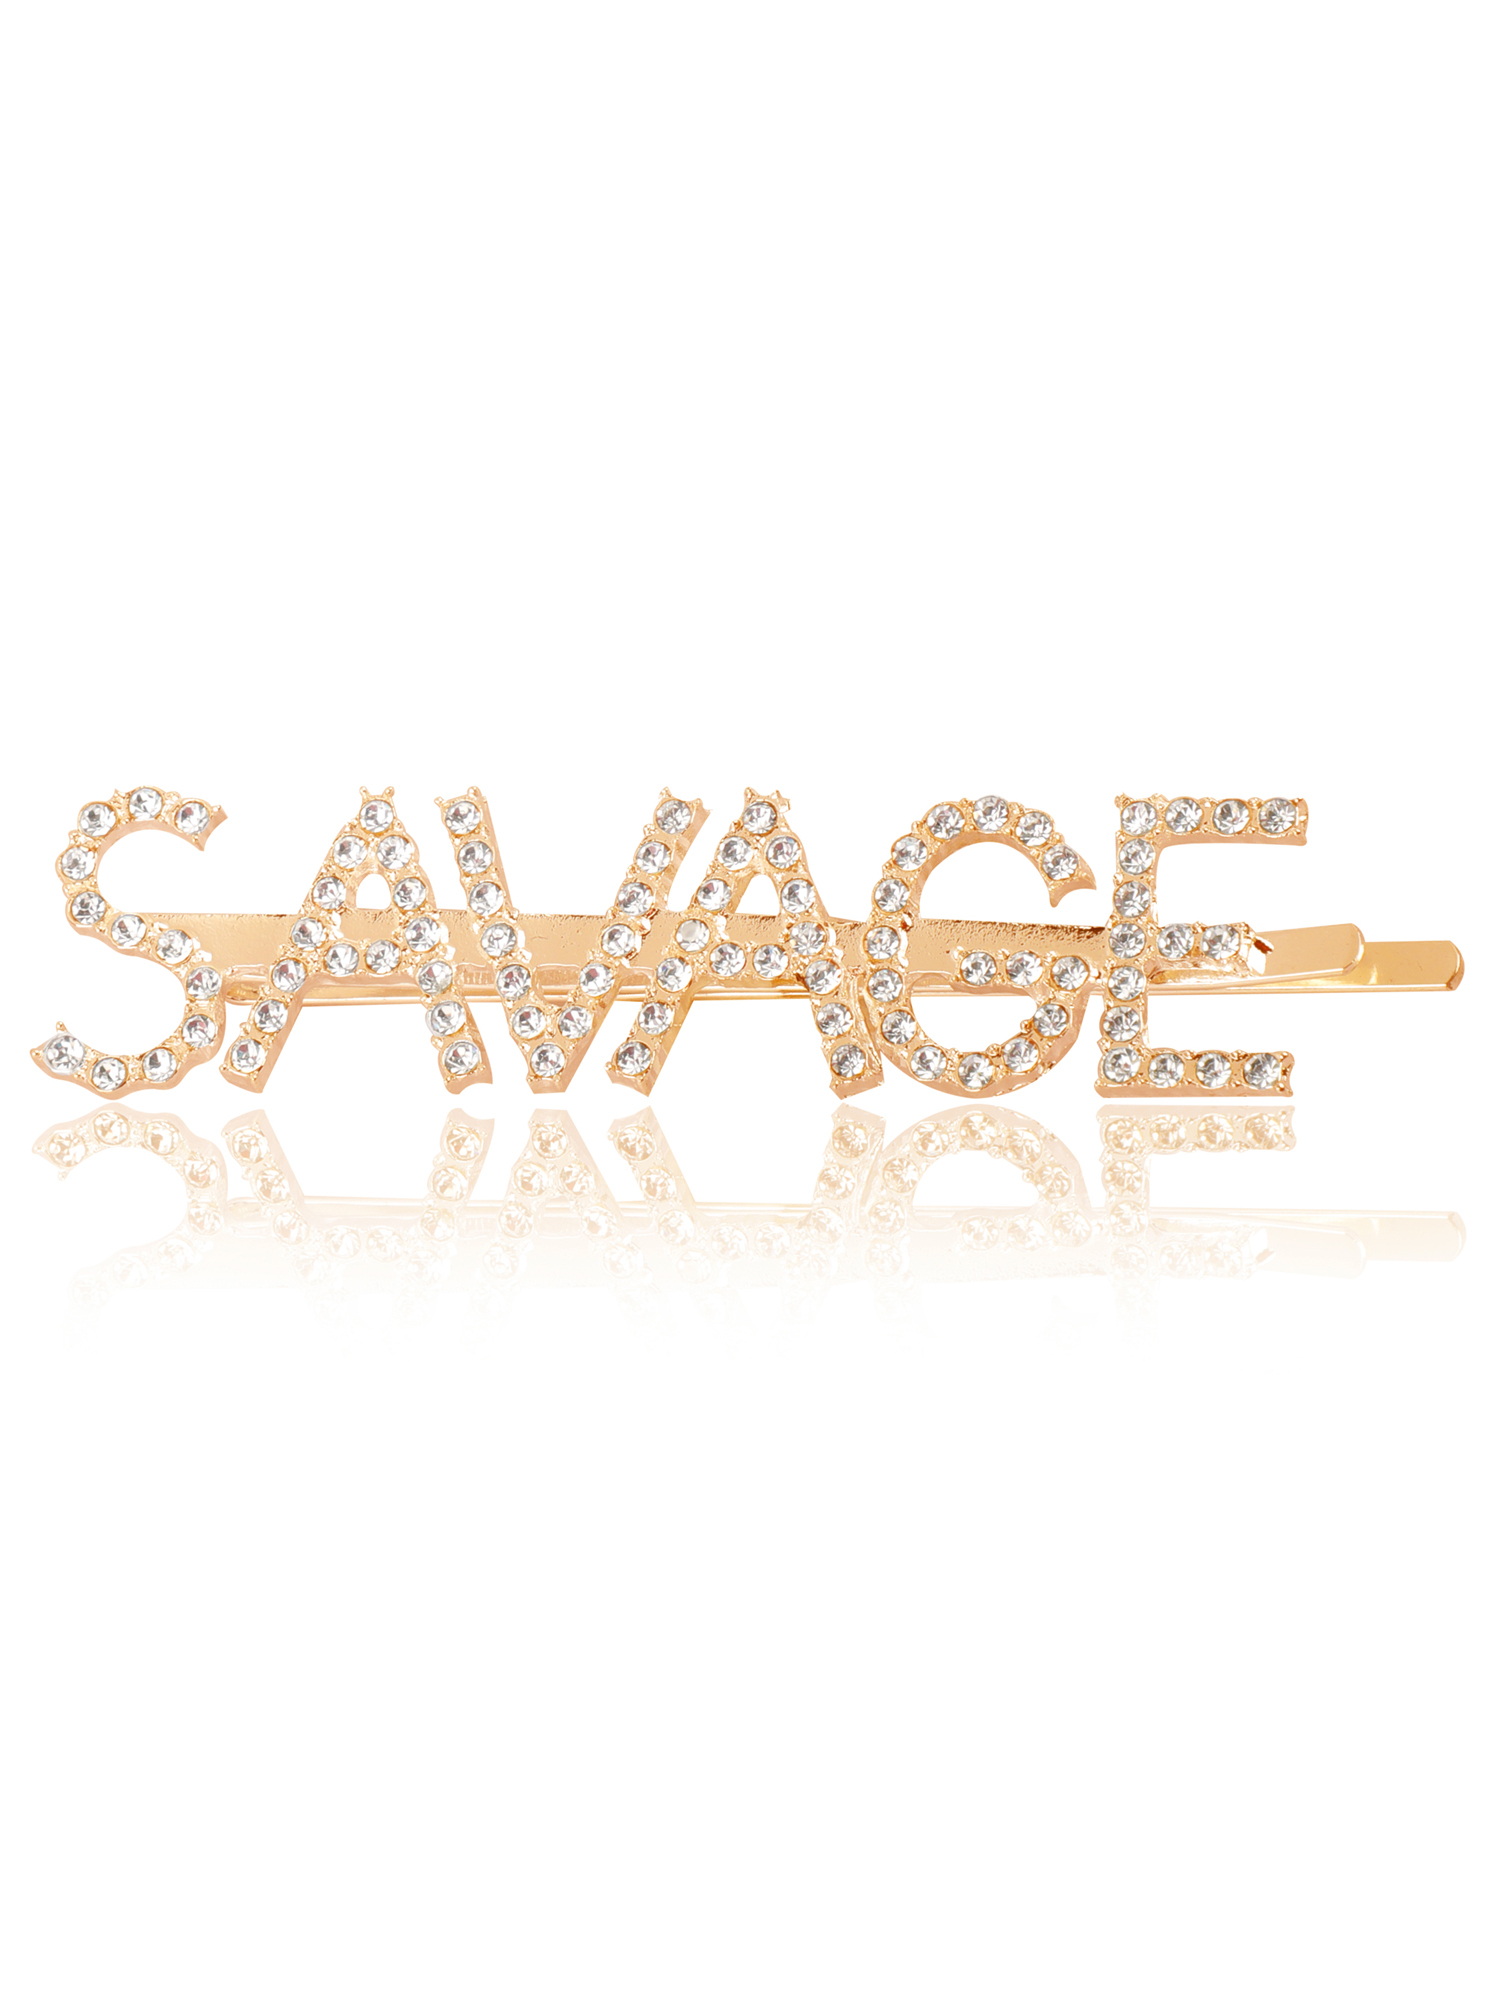 Vembley Fashion Golden Savage Word Hairclip For Women and Girls